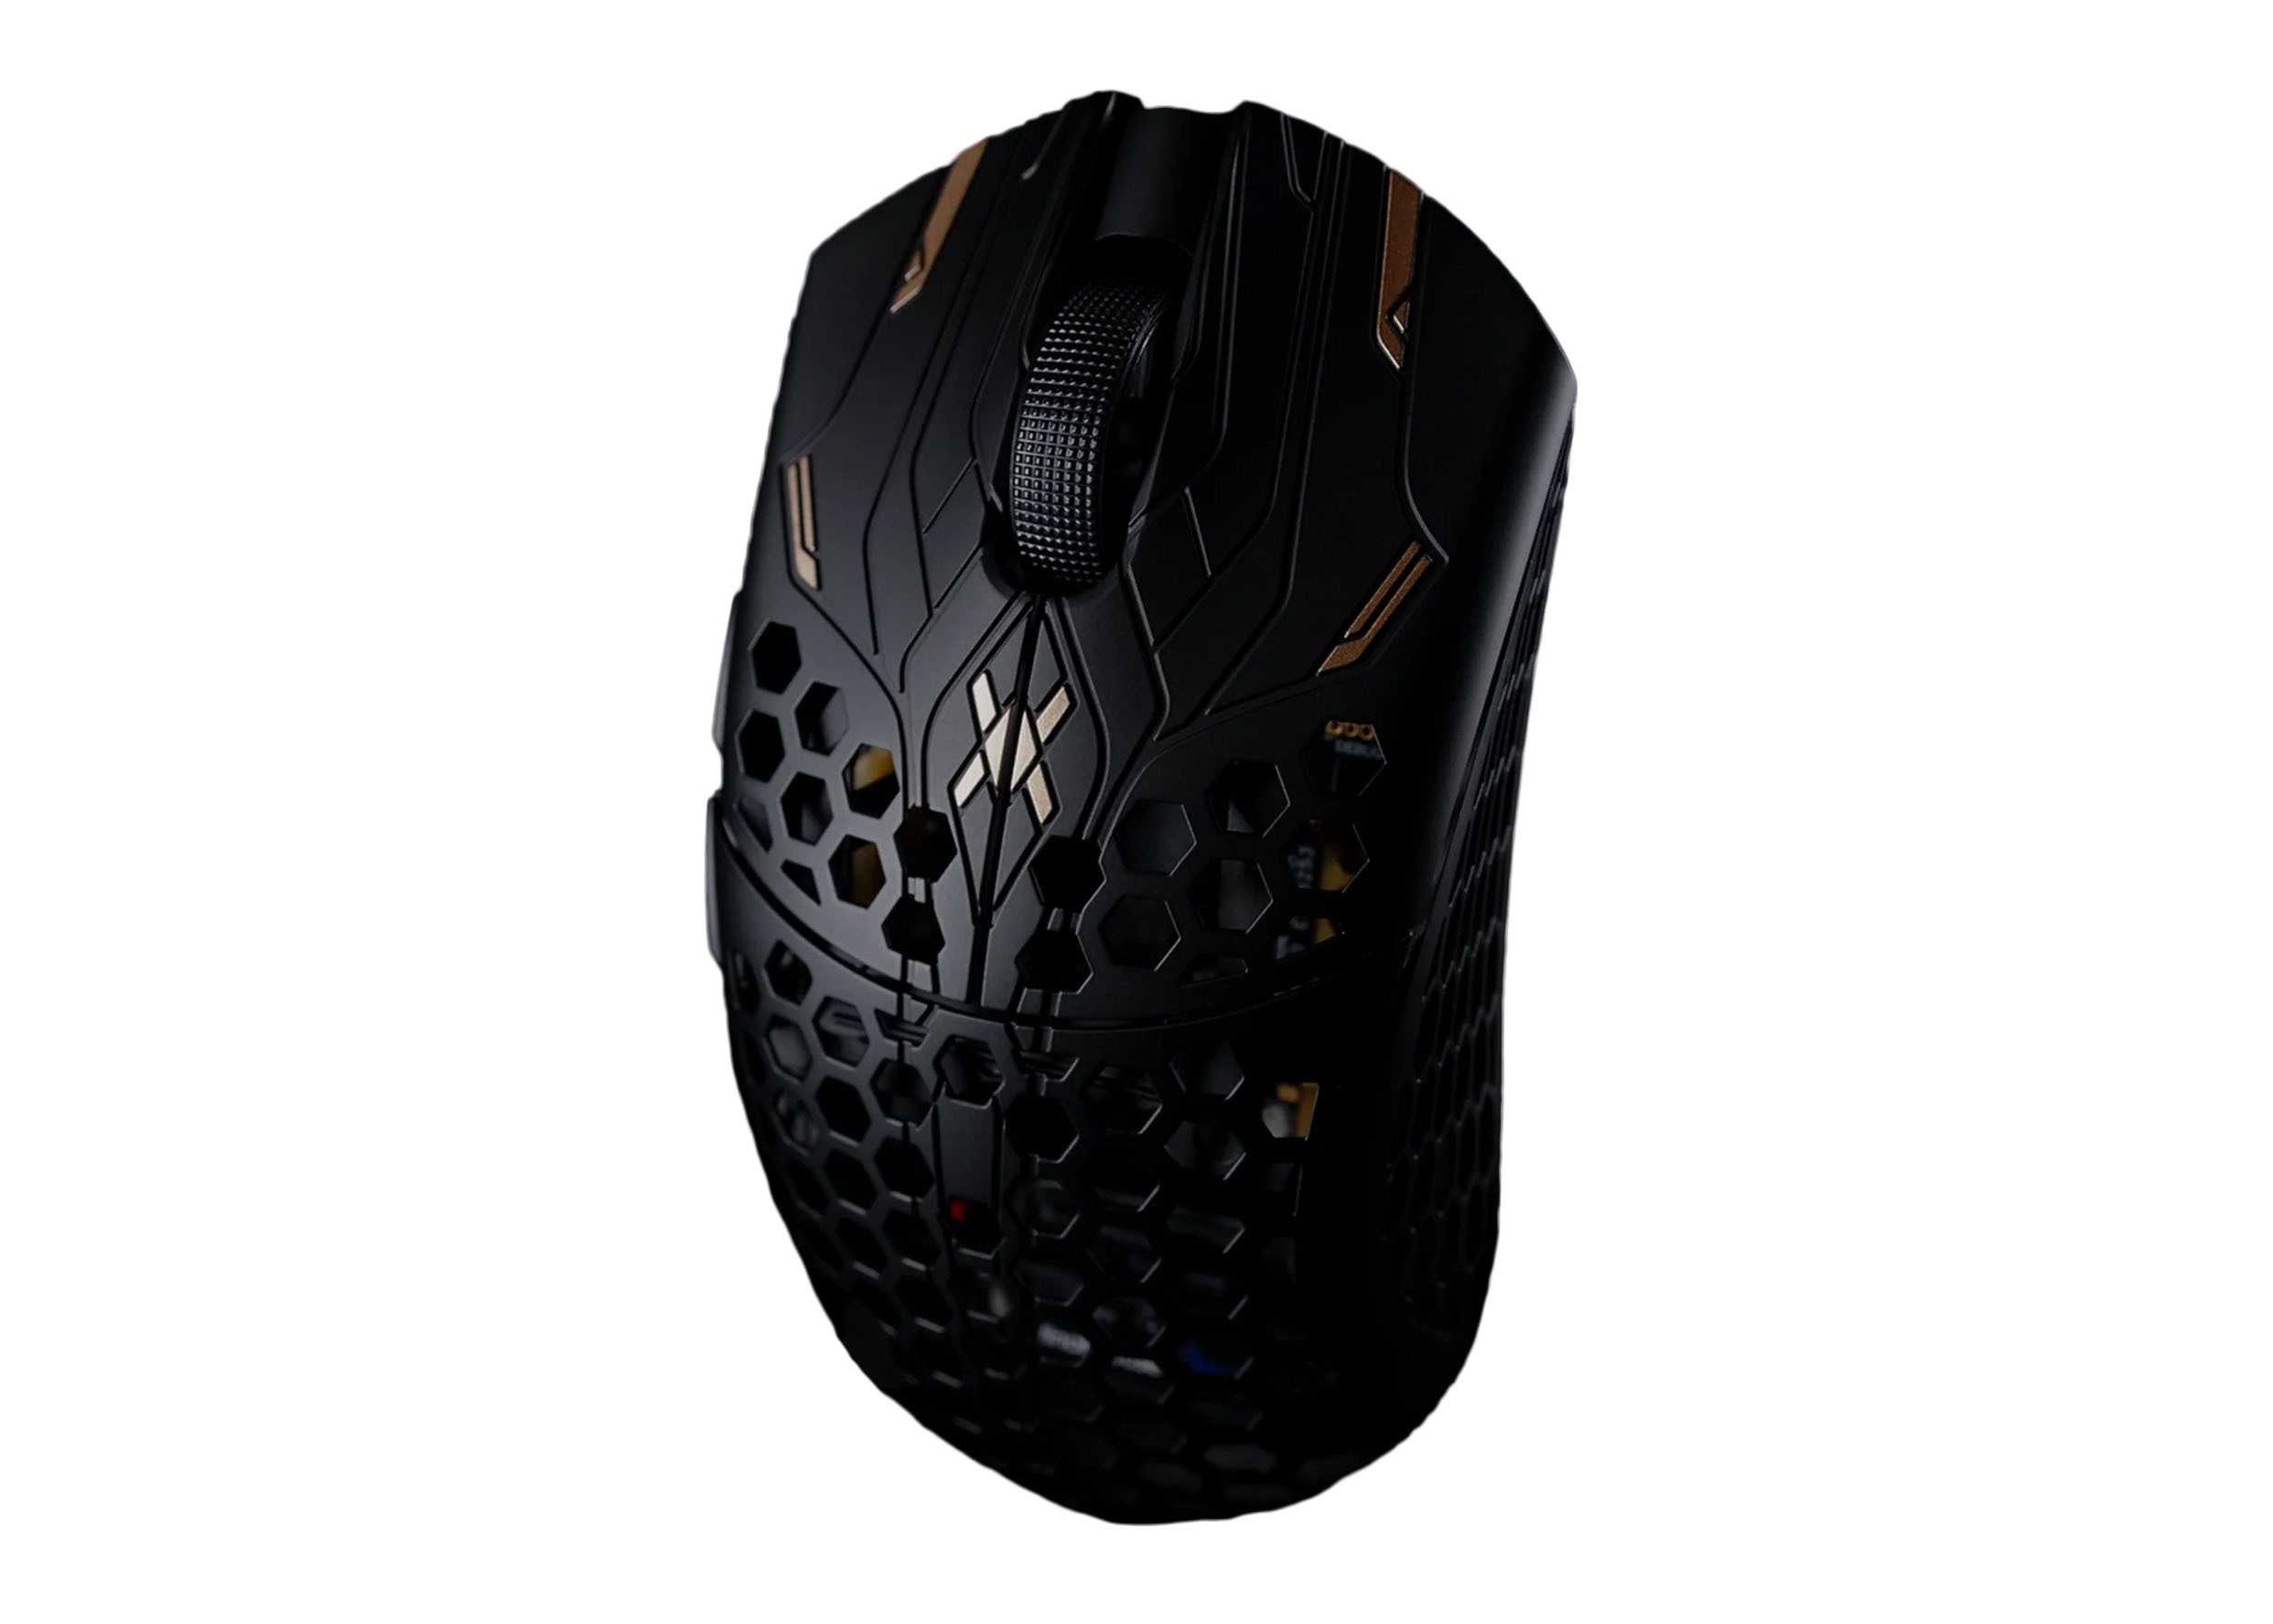 Finalmouse UltralightX Guardian Mスマホ・タブレット・パソコン